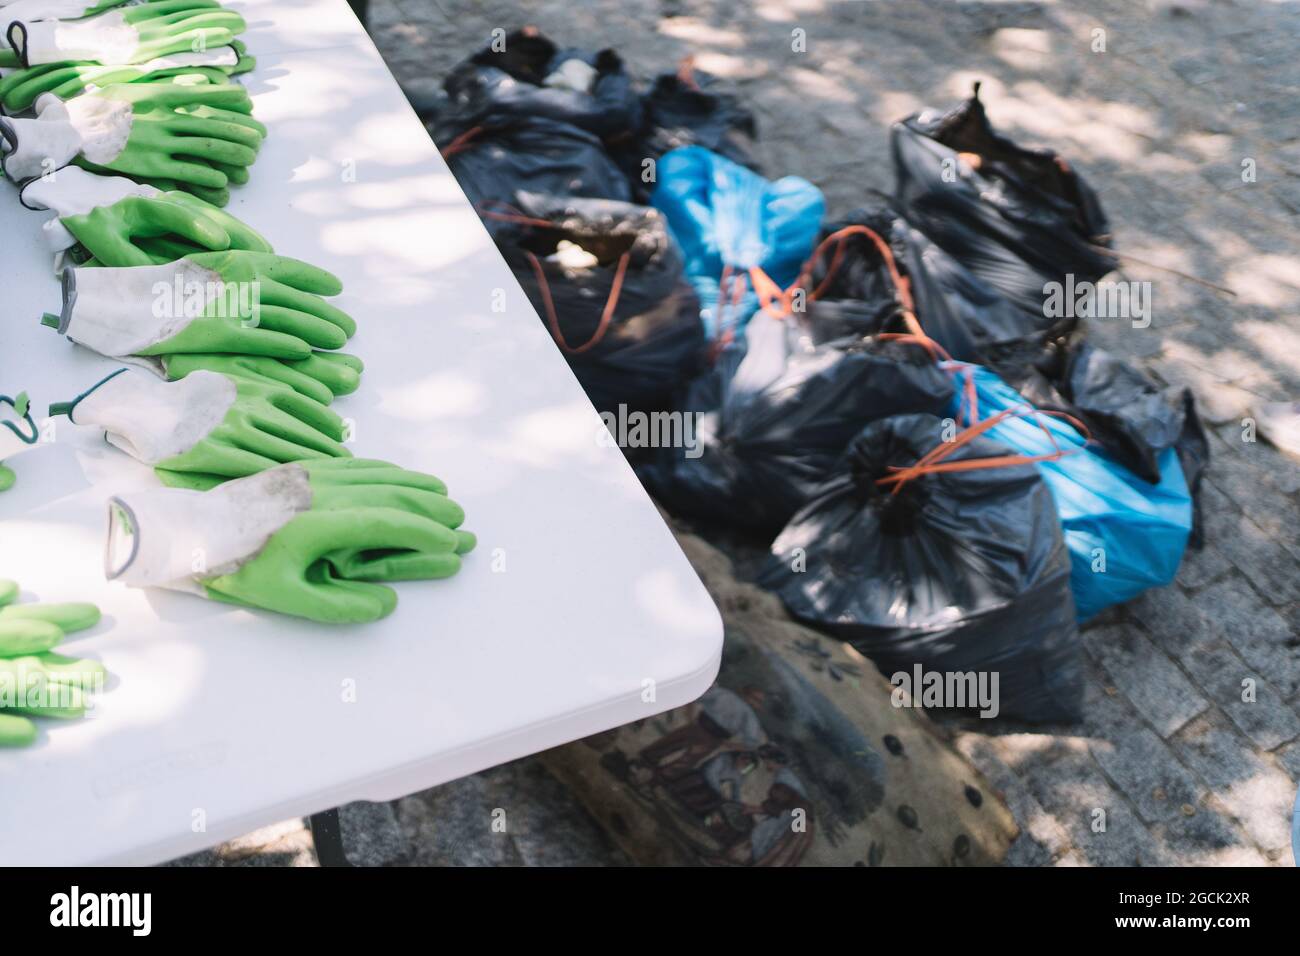 https://c8.alamy.com/comp/2GCK2XR/green-rubber-gloves-placed-on-table-near-heap-of-trash-bags-during-environmental-clean-up-campaign-in-summer-park-2GCK2XR.jpg